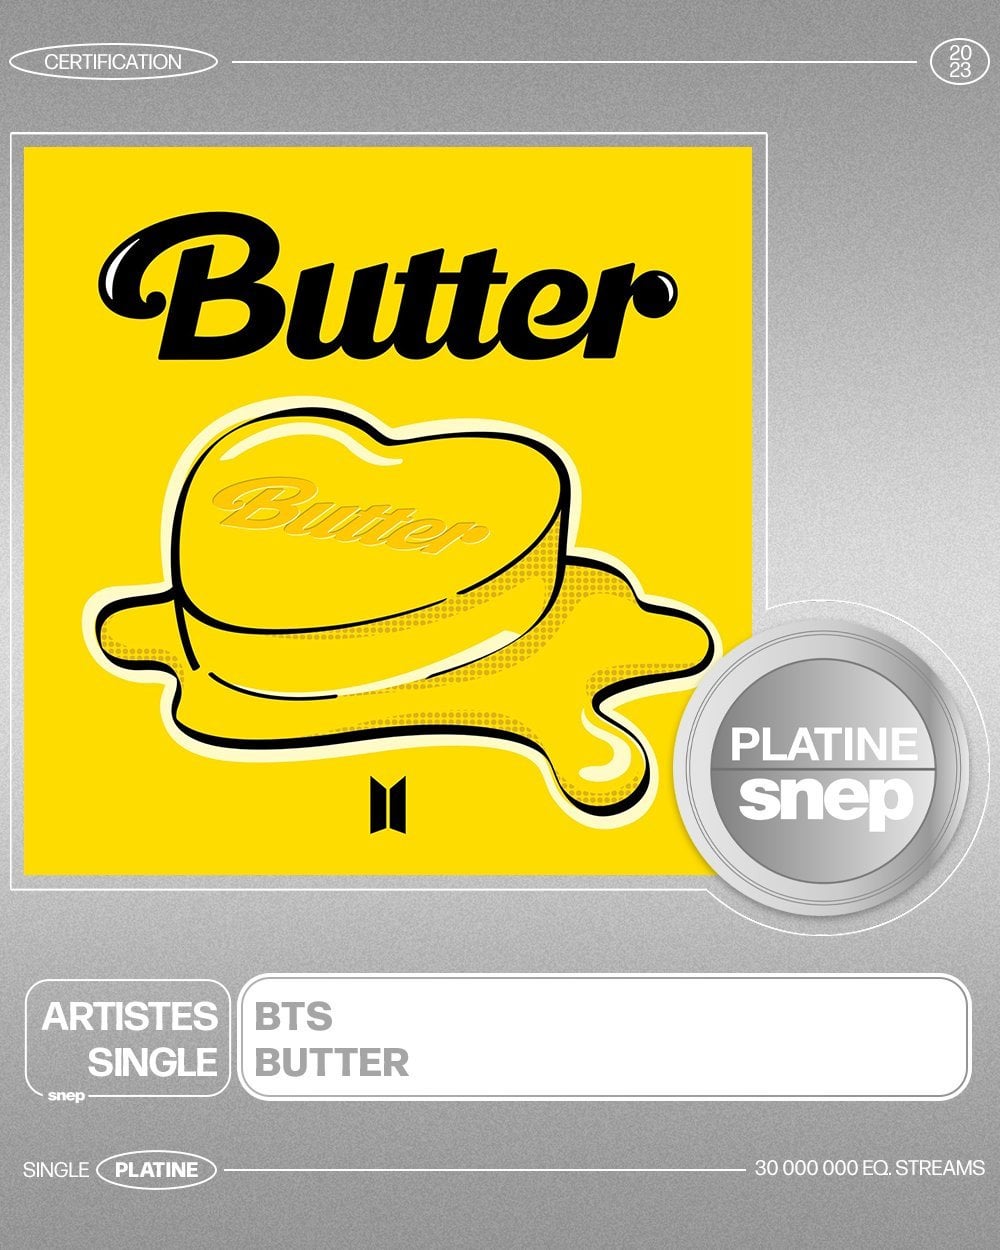 231204 “Butter” has been certified ‘Platinum’ in France